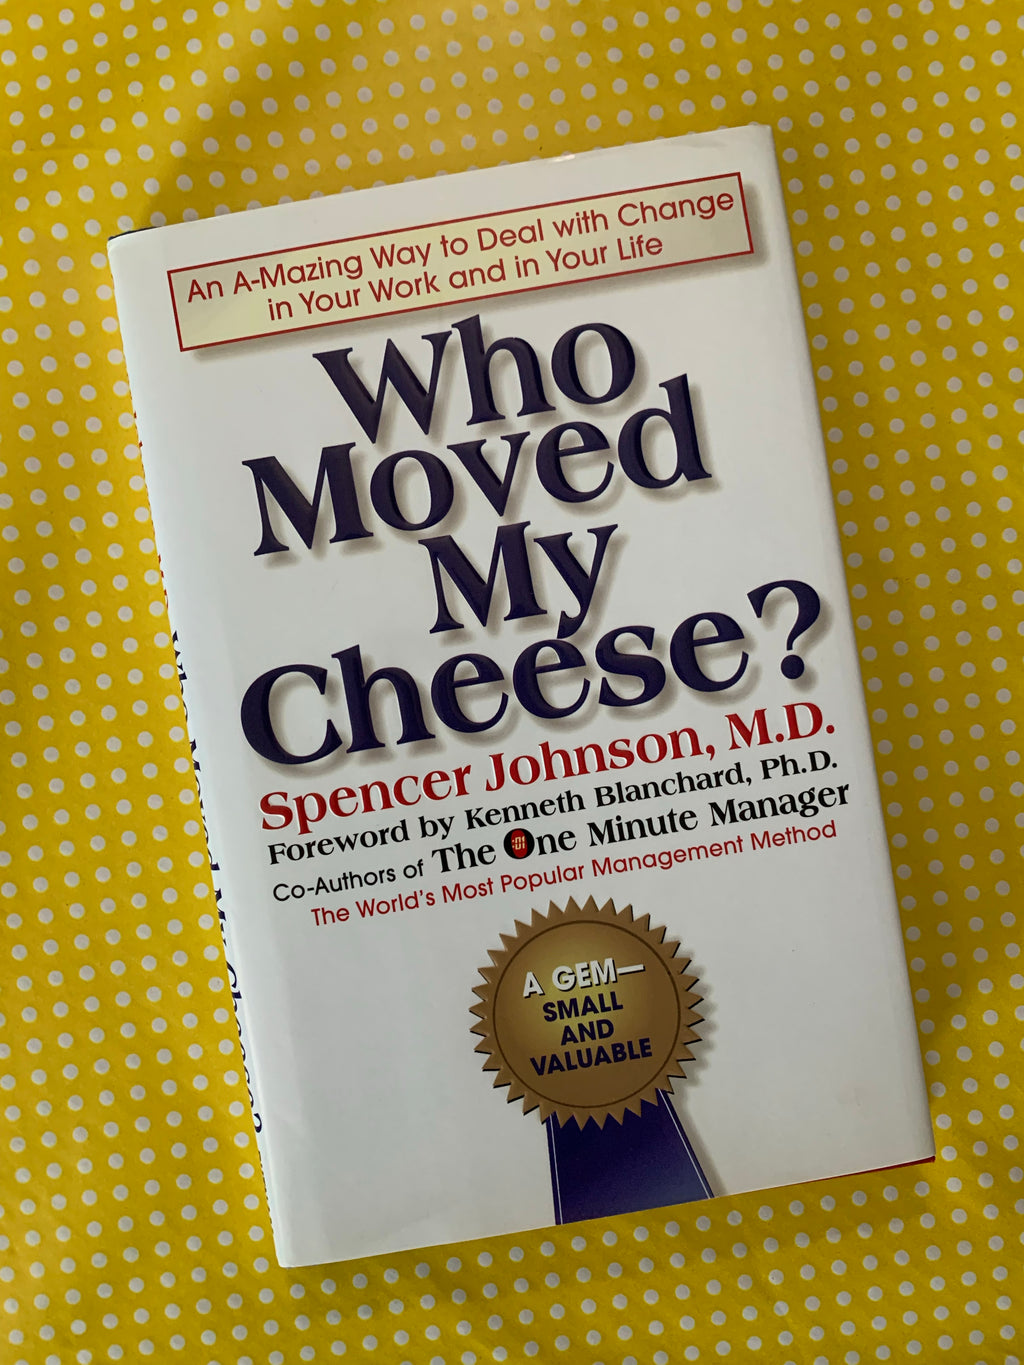 Who Moved My Cheese- By Spencer Johnson, M.D.